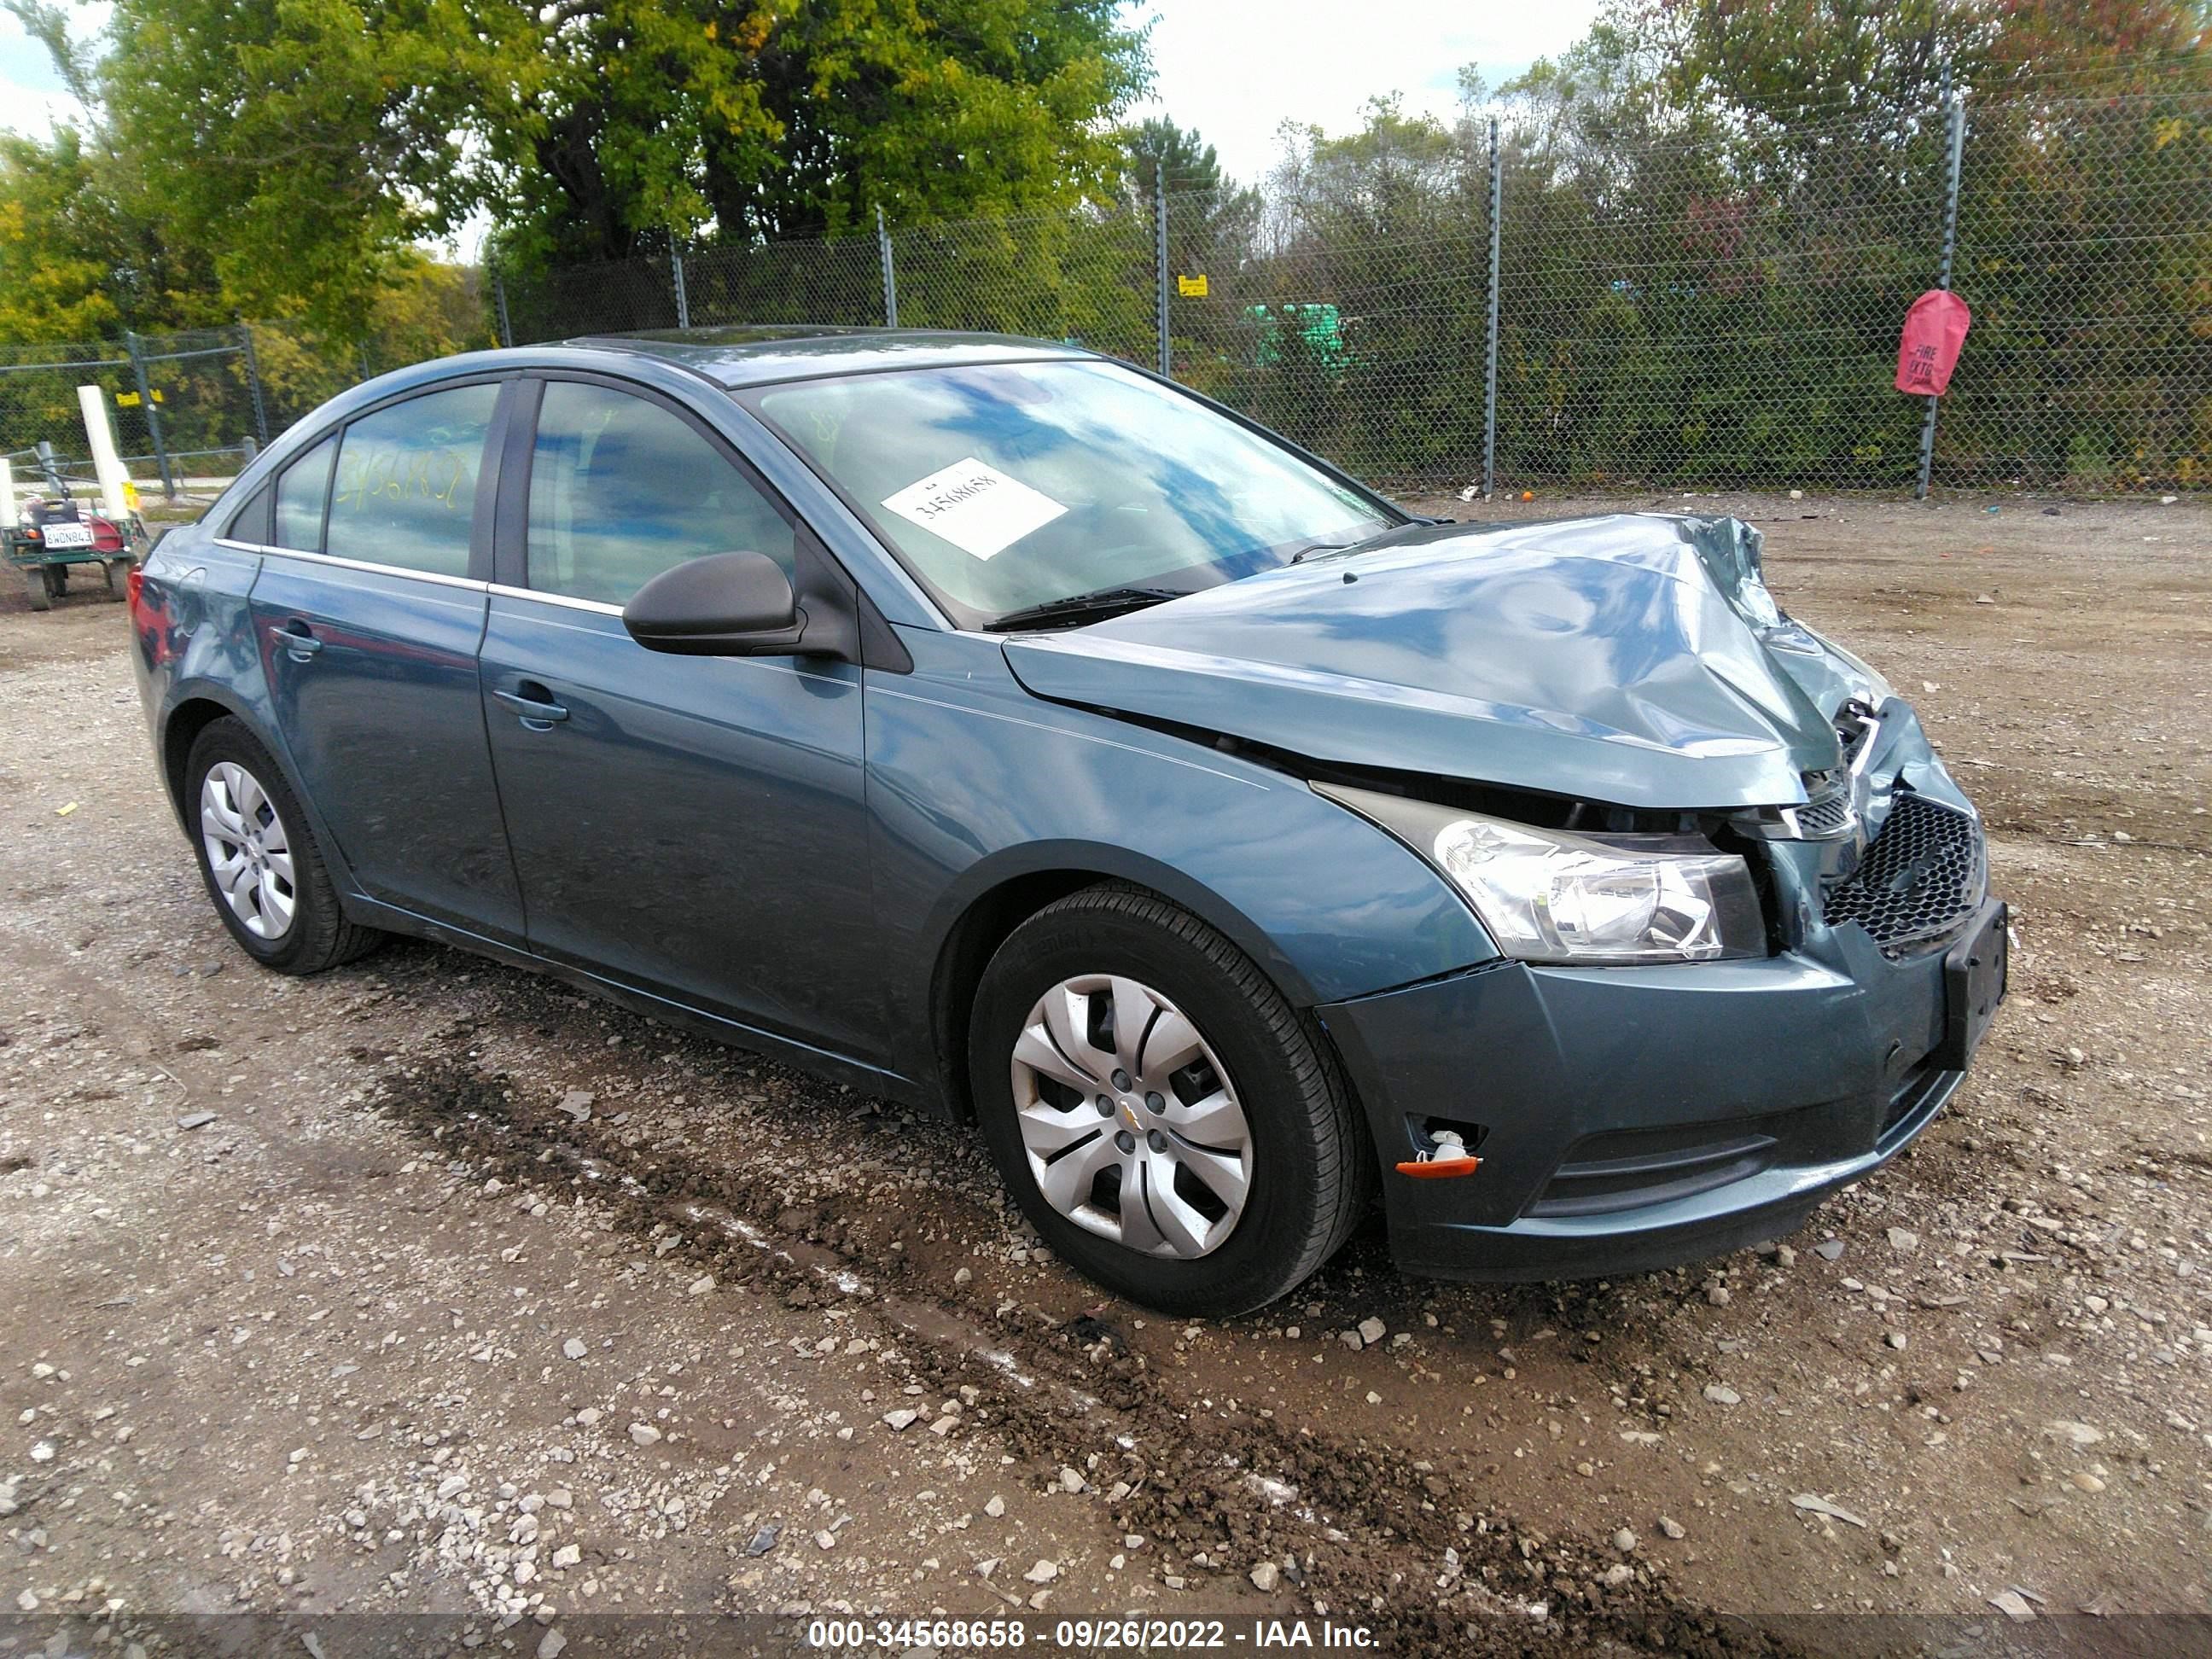 vin: 1G1PC5SH0C7369841 1G1PC5SH0C7369841 2012 chevrolet cruze 1800 for Sale in 53089, N70 W25277 Indian Grass Lane, Sussex, Texas, USA